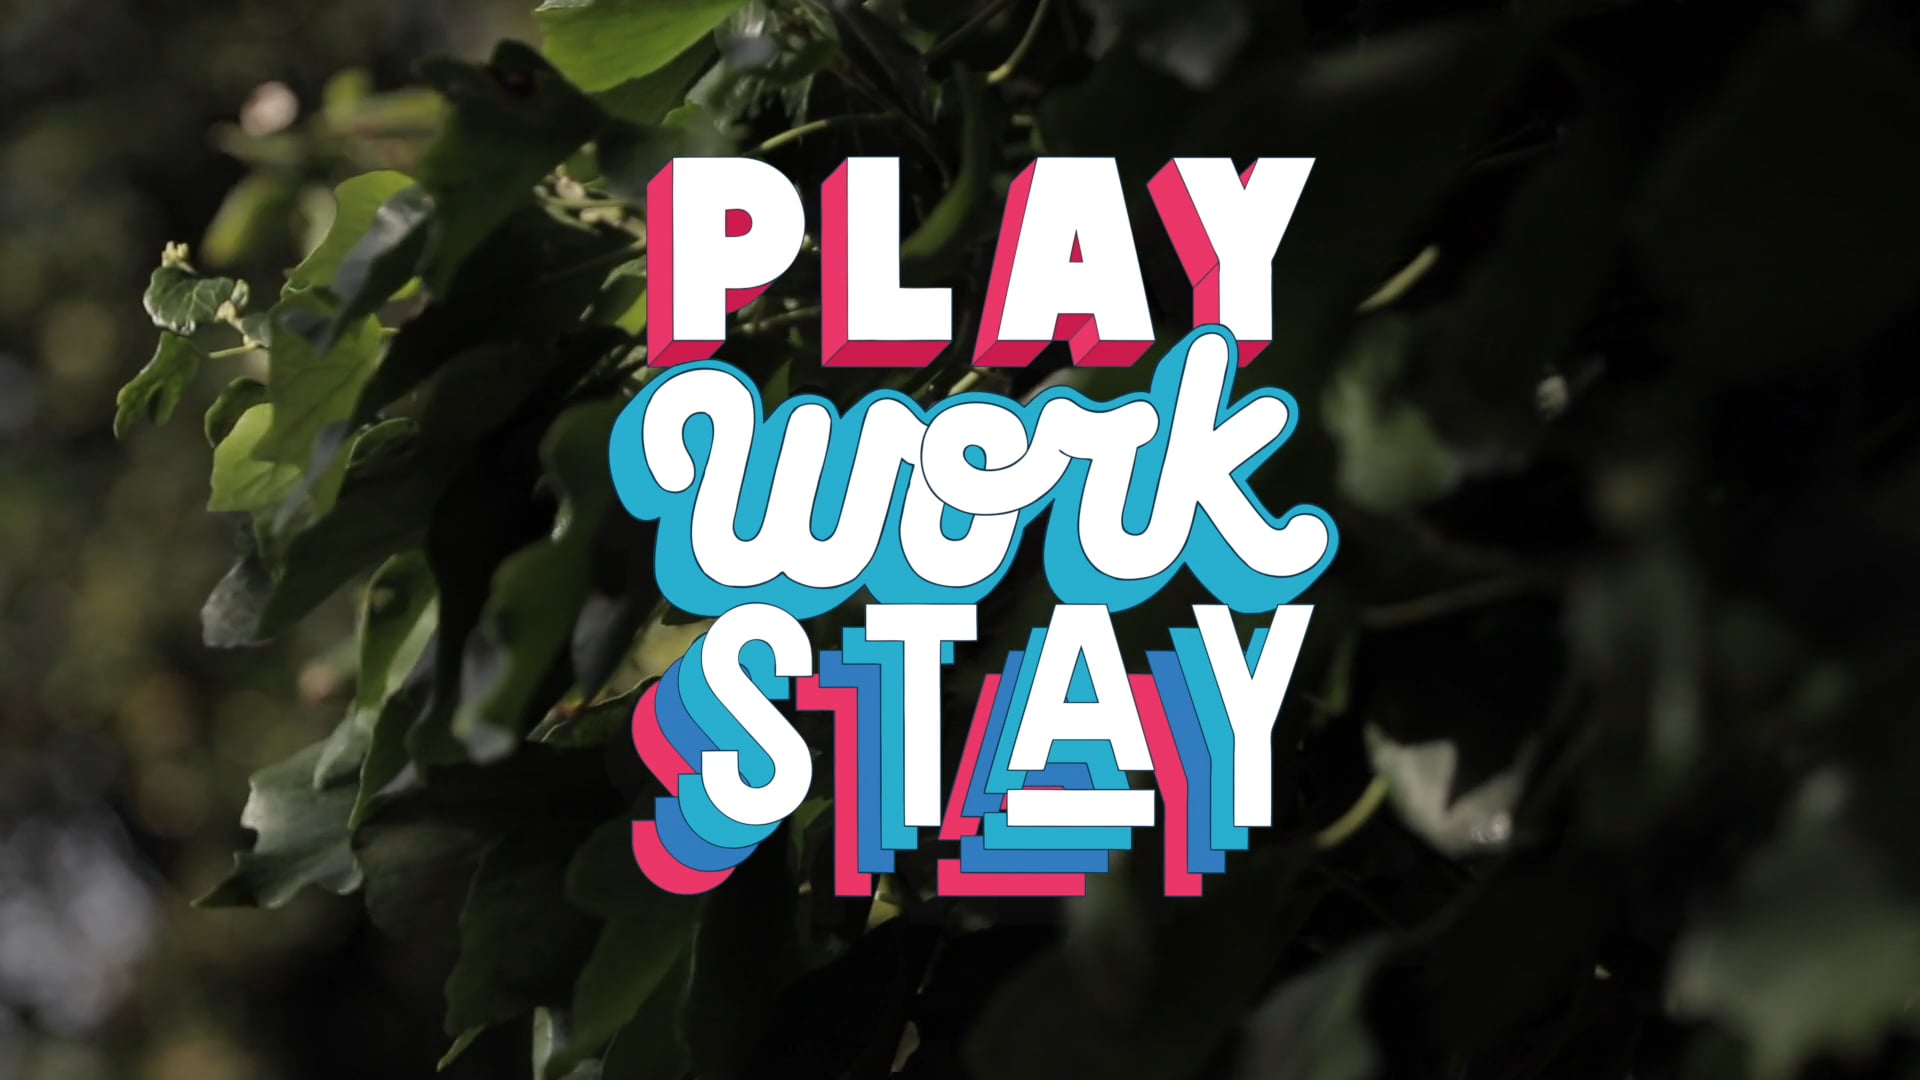 Applying Creativity To Business - Play Work Stay